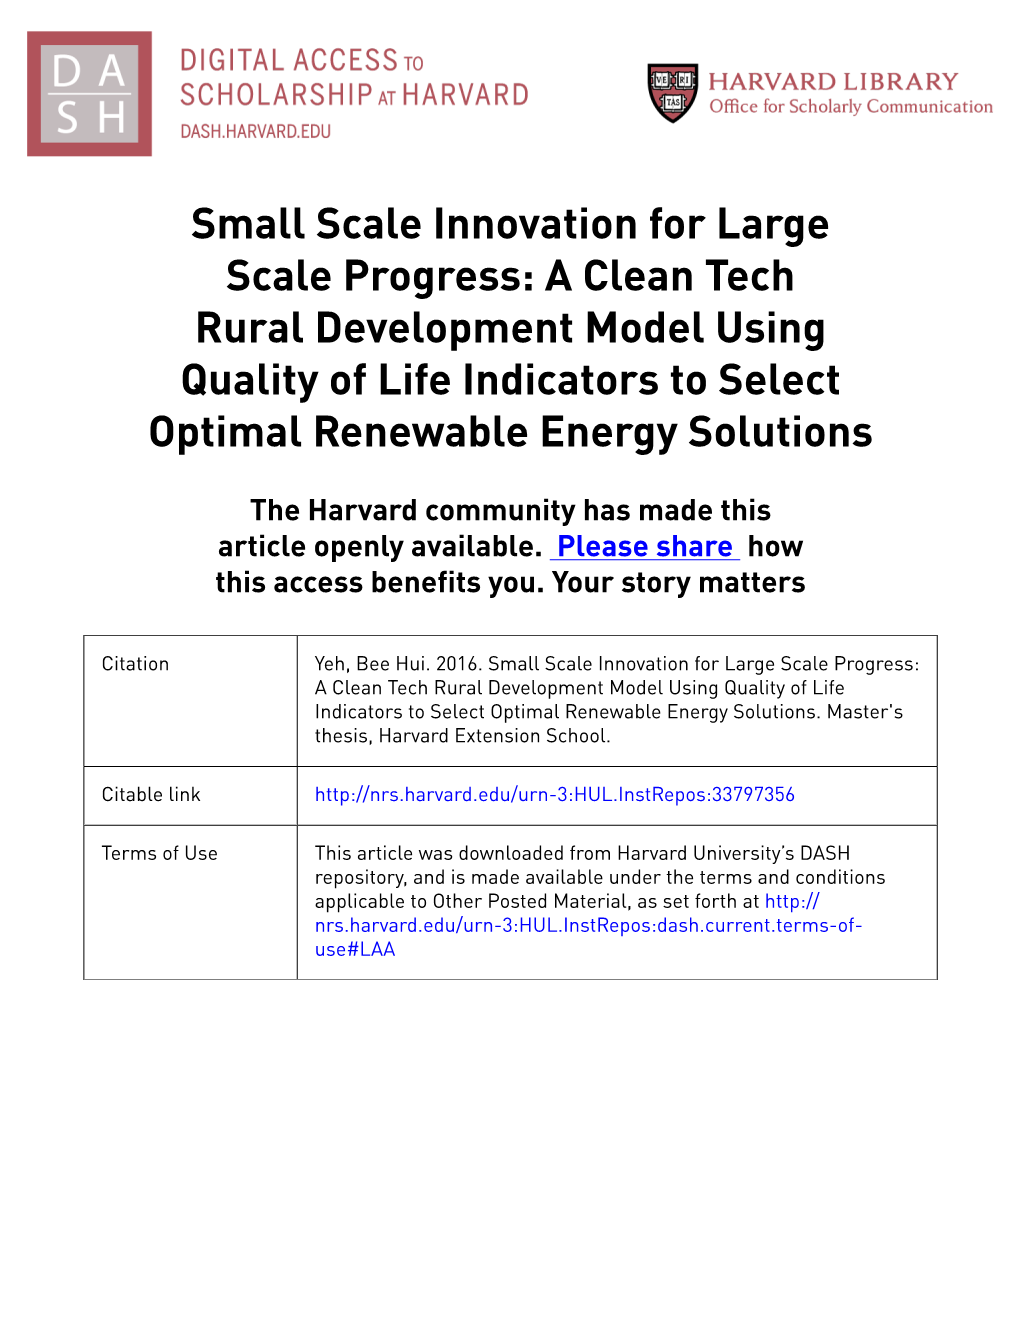 A Clean Tech Rural Development Model Using Quality of Life Indicators to Select Optimal Renewable Energy Solutions